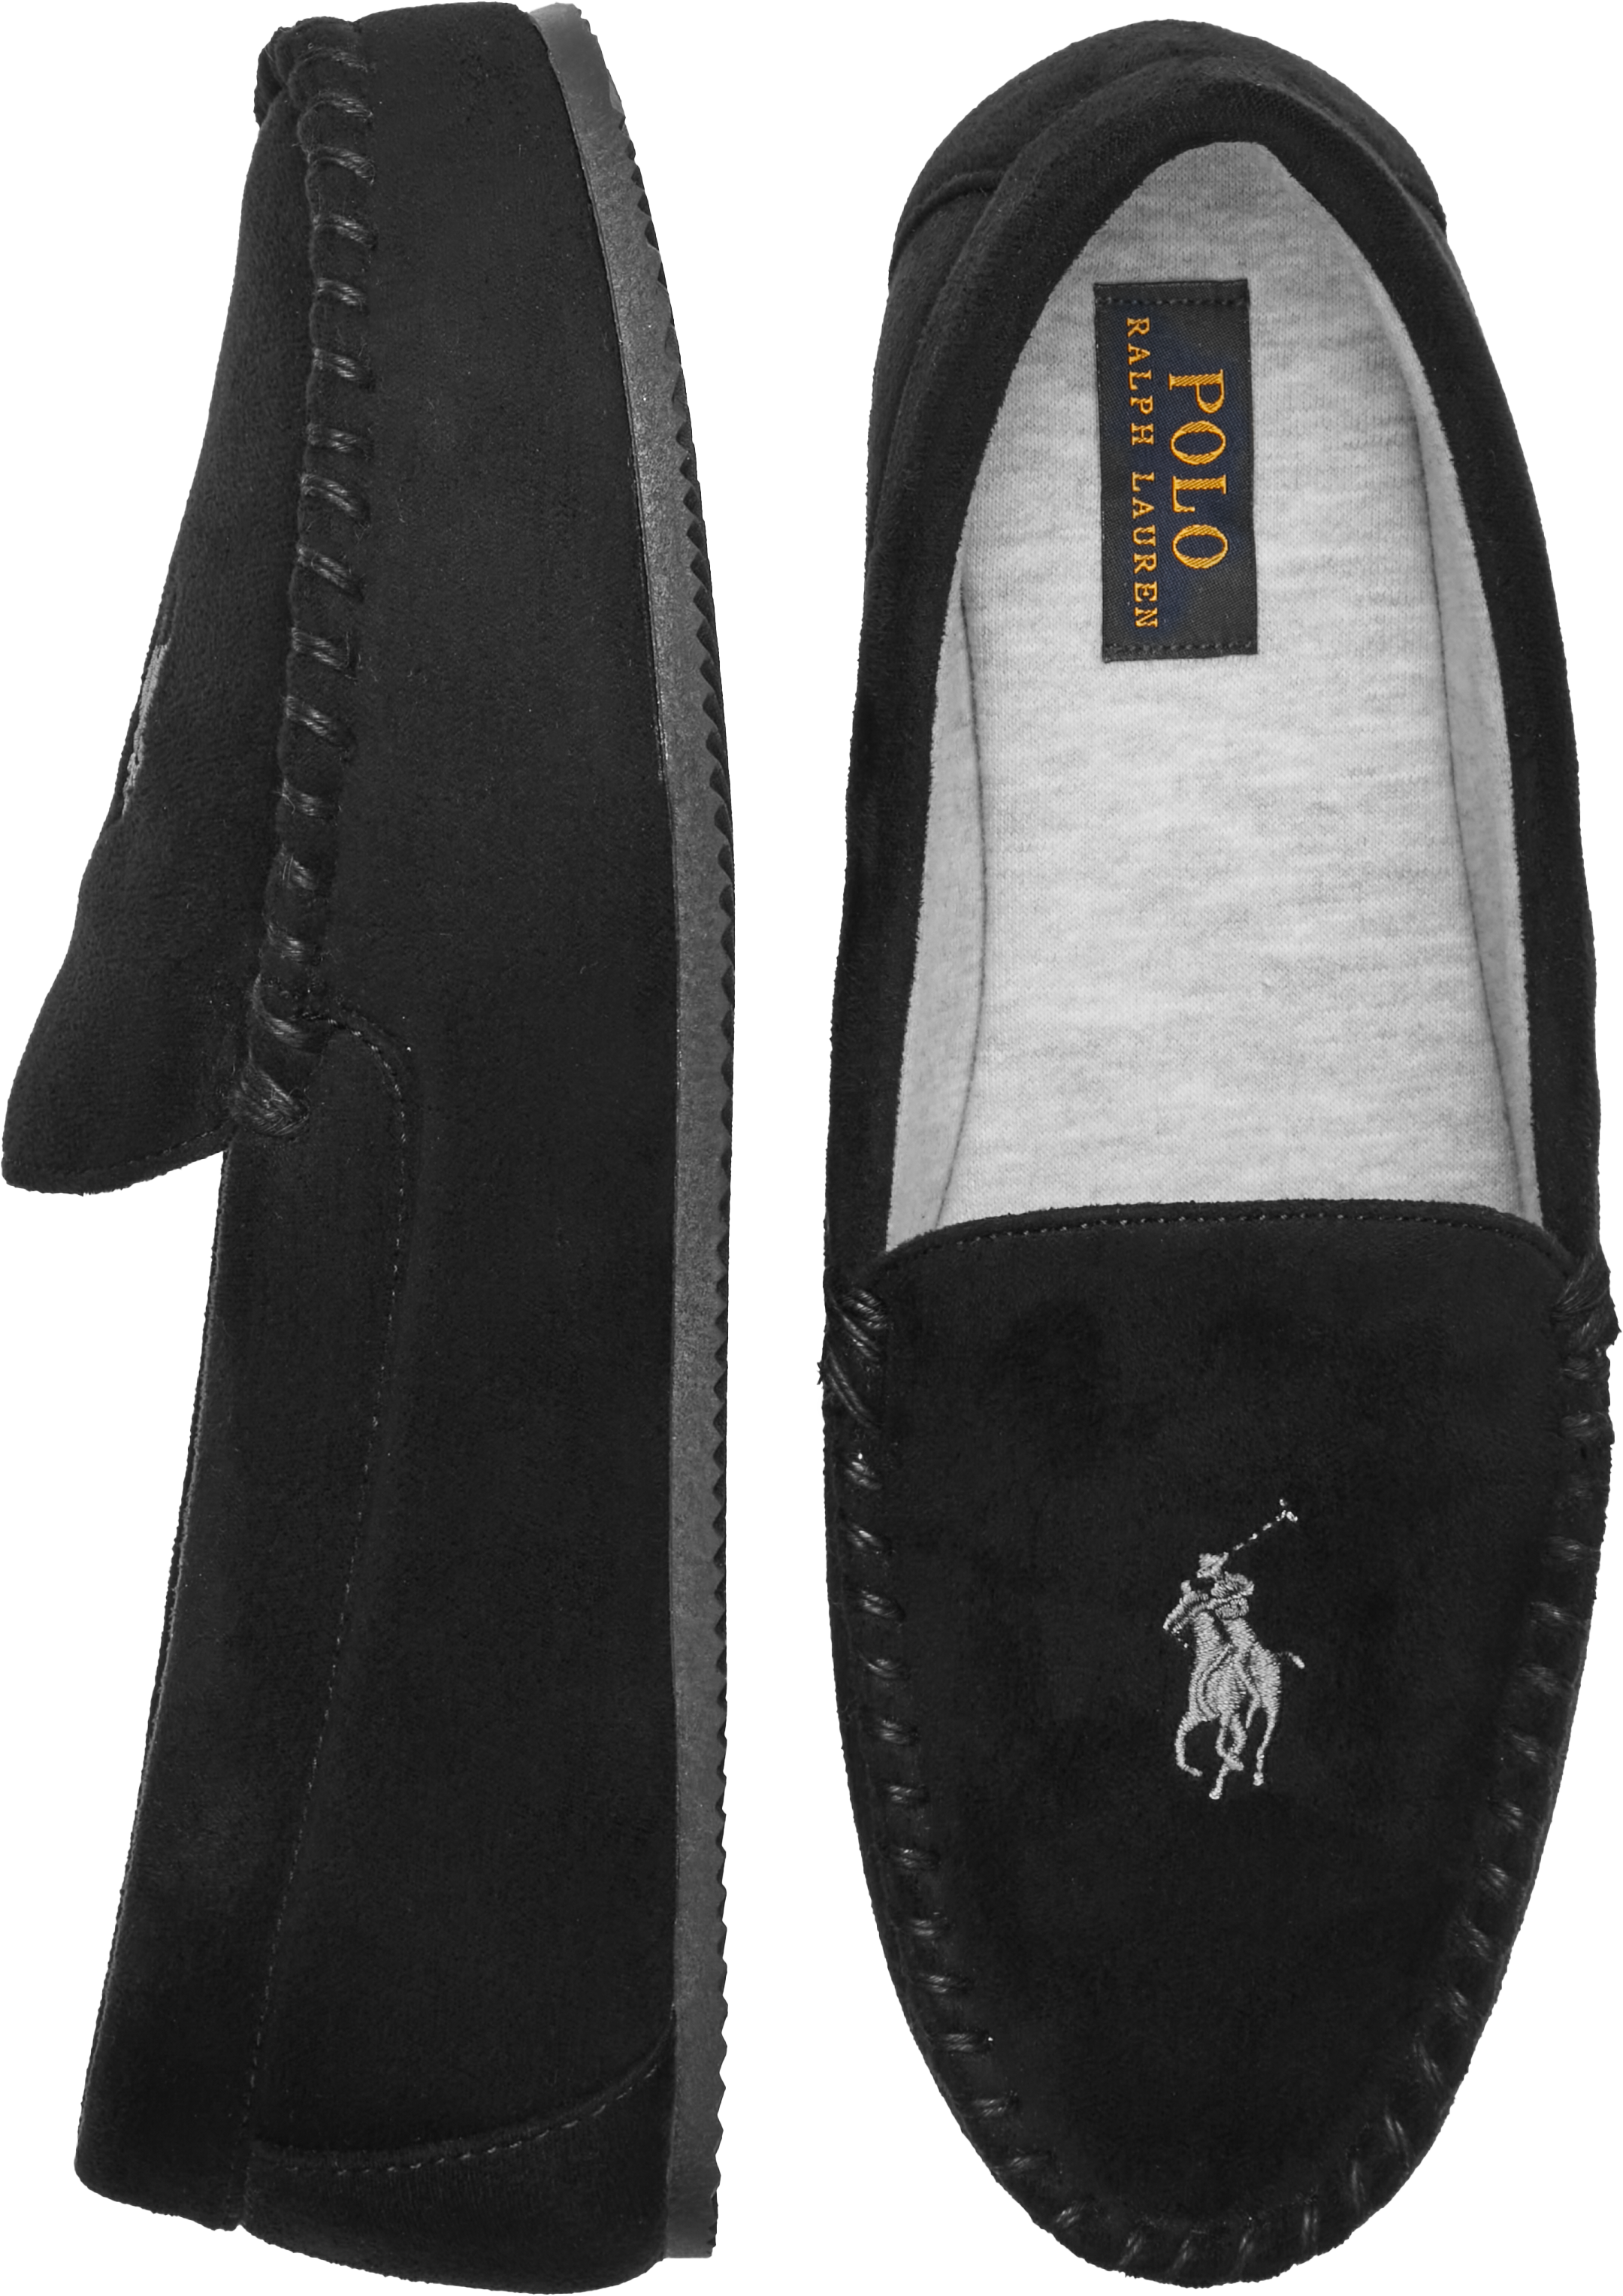 Polo Ralph Lauren Dezi IV Pony Moccasin Slippers only $14.99 ...